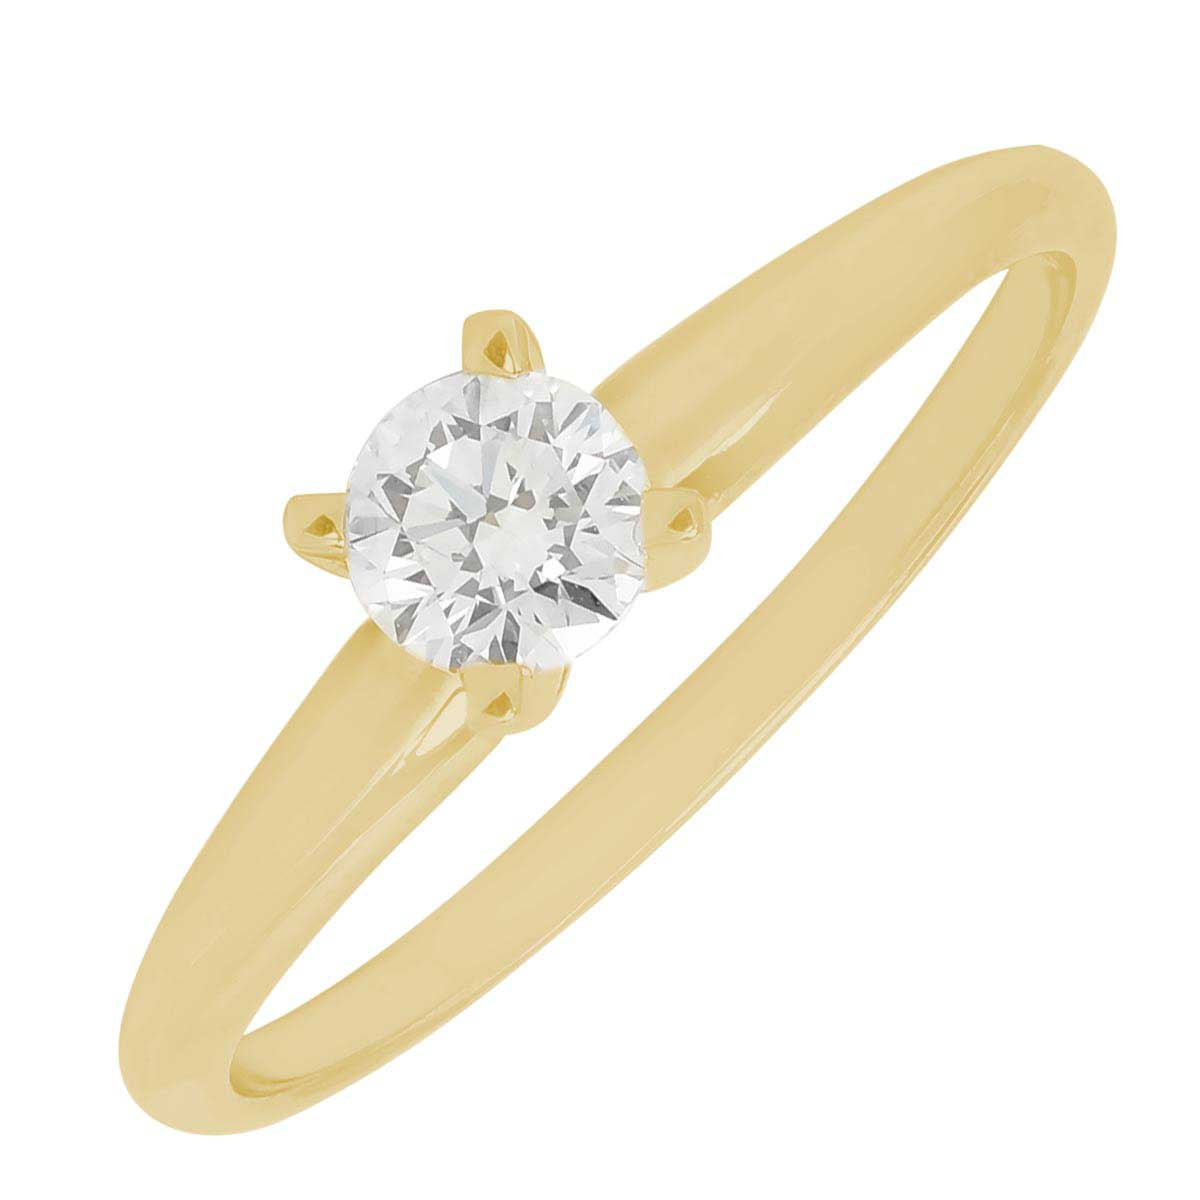 Diamond Solitaire Engagement Ring in 14kt Yellow Gold (1/3ct)